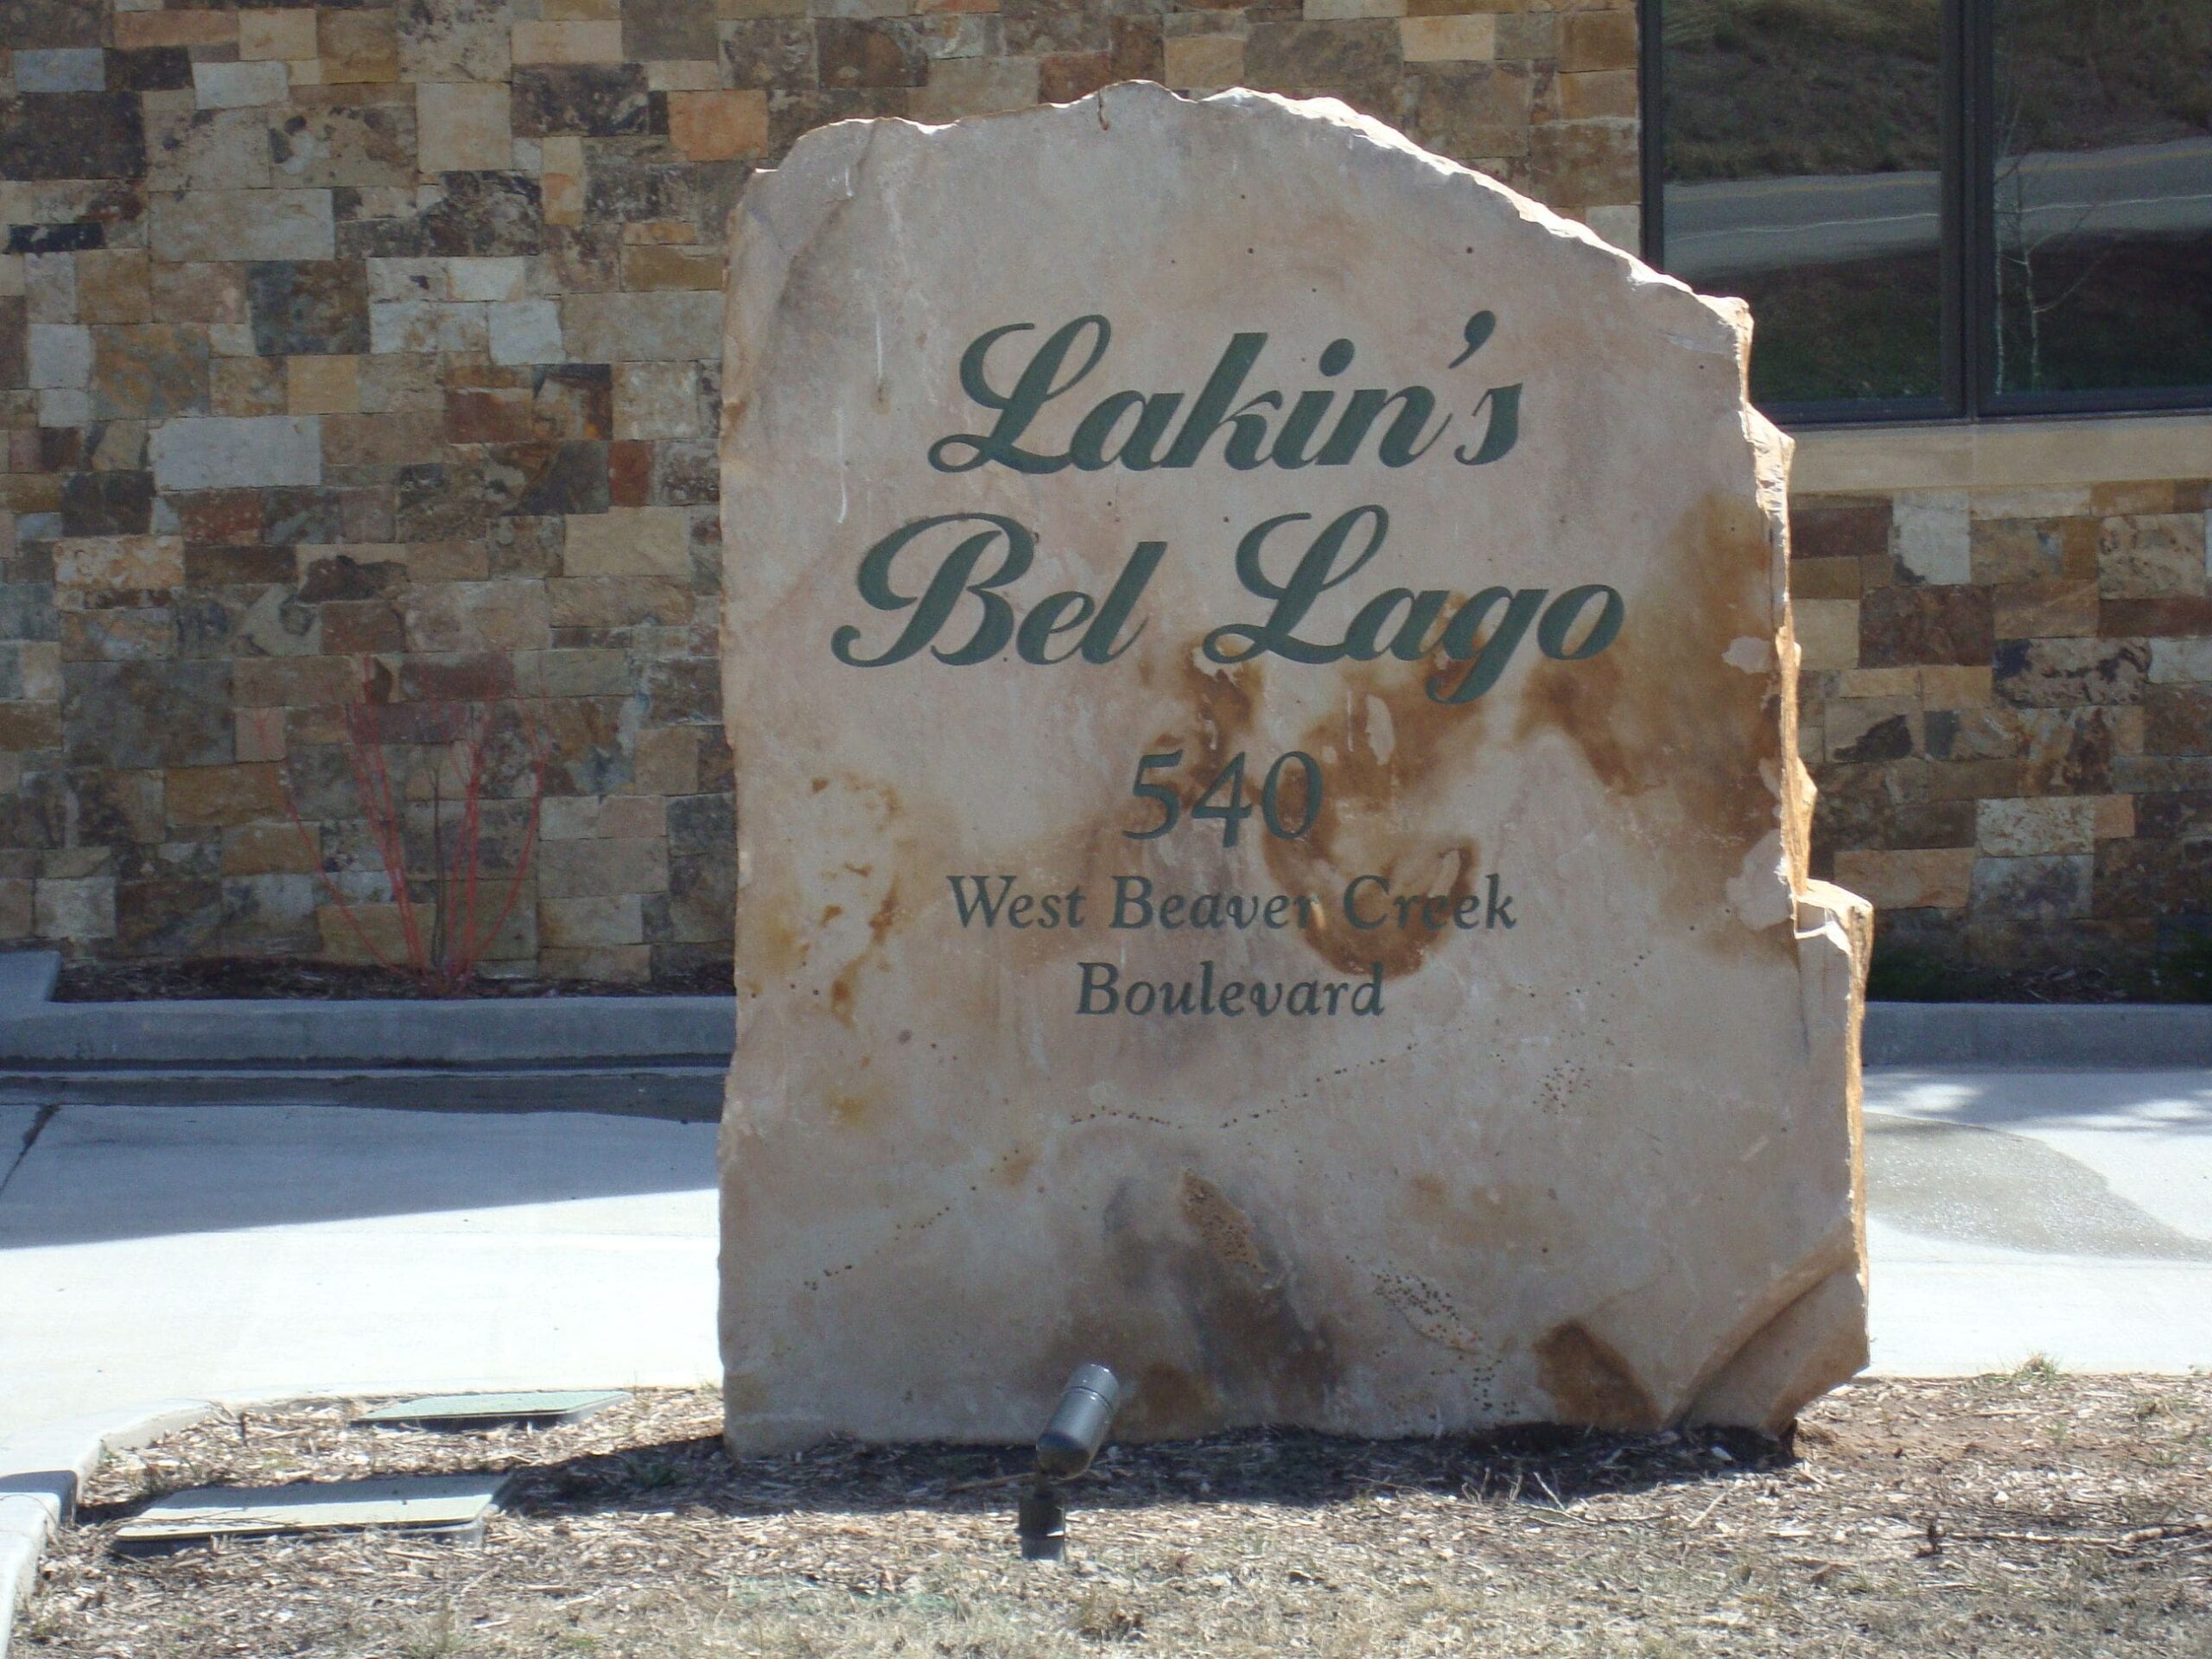 Close up view of the Bel Lago sign.